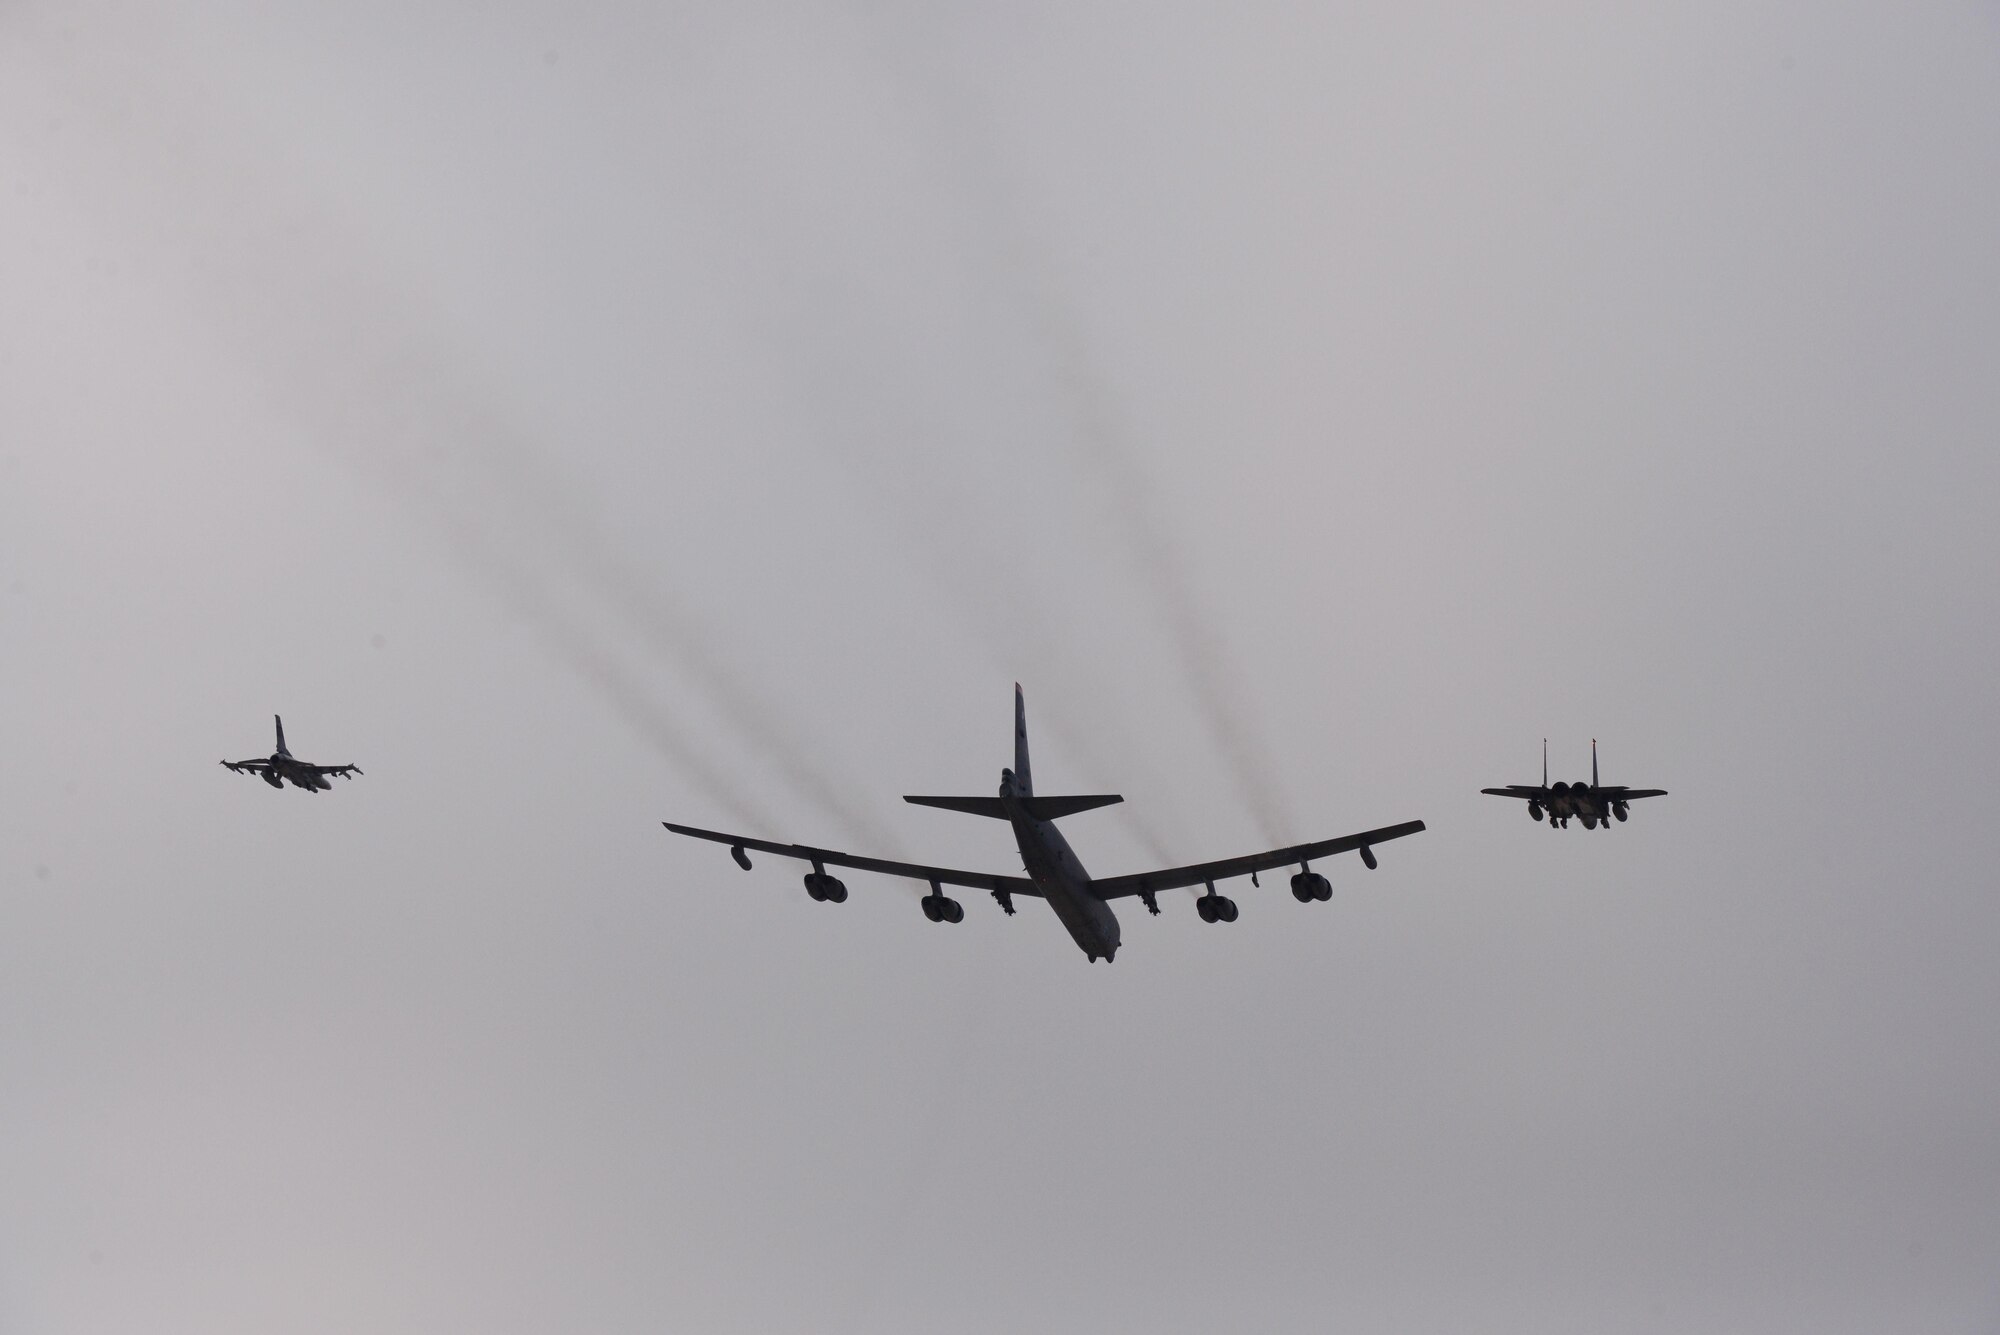 A U.S. Air Force B-52H  Stratofortress from Andersen Air Force Base, Guam, conducted a low-level flight in the vicinity of Osan, South Korea, in response to recent provocative action by North Korea Jan. 10, 2016. The B-52 was joined by a ROKAF F-15 Slam Eagle and a U.S. Air Force F-16 Fighting Falcon.  The B-52 is a is a long-range, heavy bomber that can fly up to 50,000 feet and has the capability to carry 70,000 pounds of nuclear or precision guided conventional ordnance with worldwide precision navigation capability. (U.S. Air Force photo/Staff Sgt. Amber Grimm)